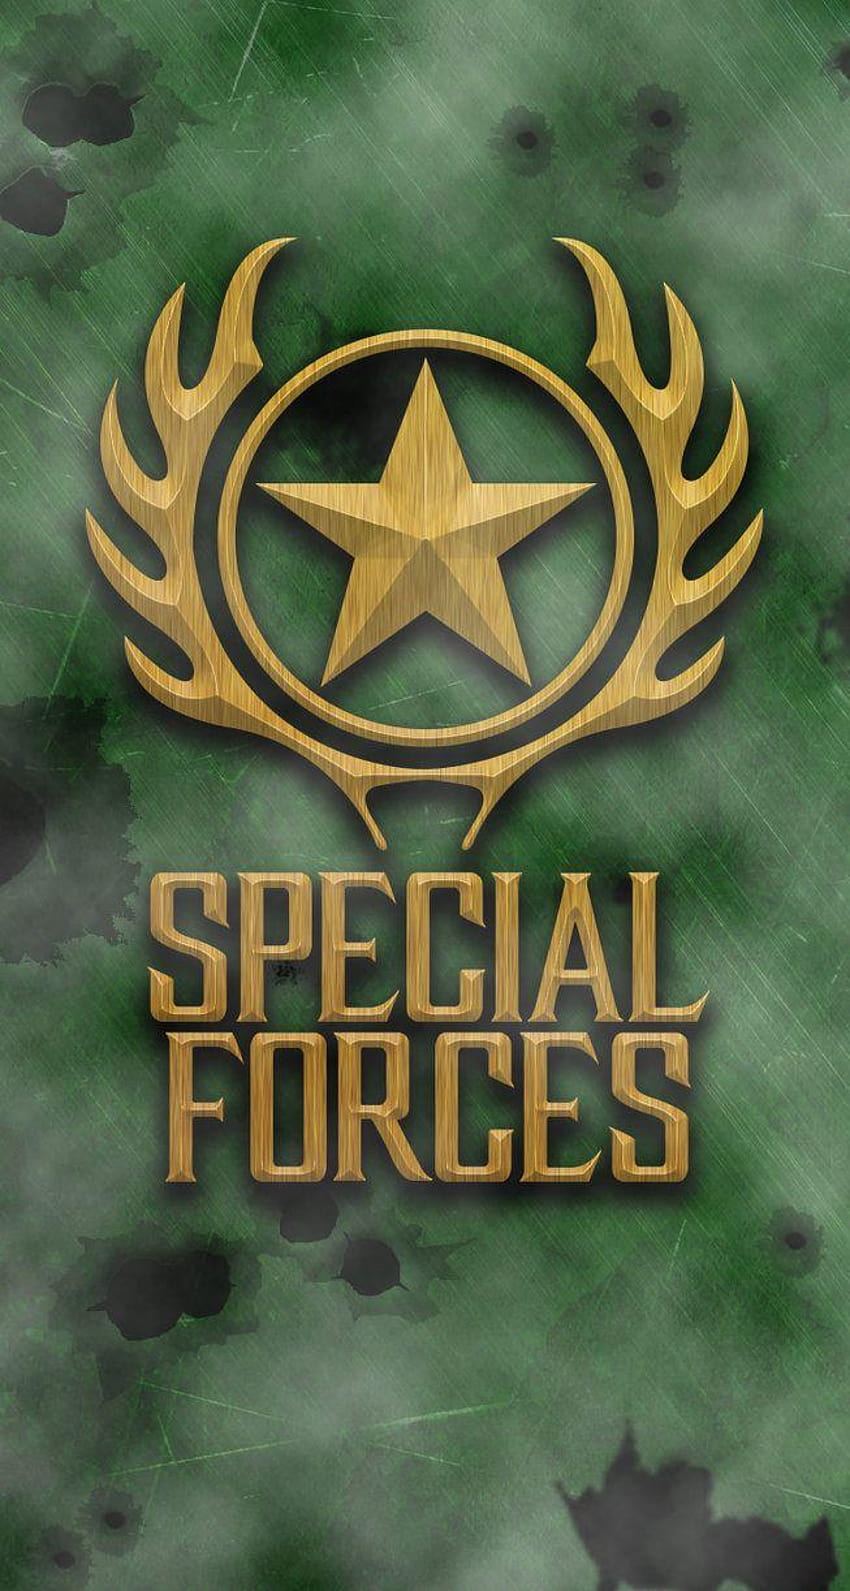 Special Forces for iPhone 5 by RenegadeDeadpoo, special forces logo HD phone wallpaper